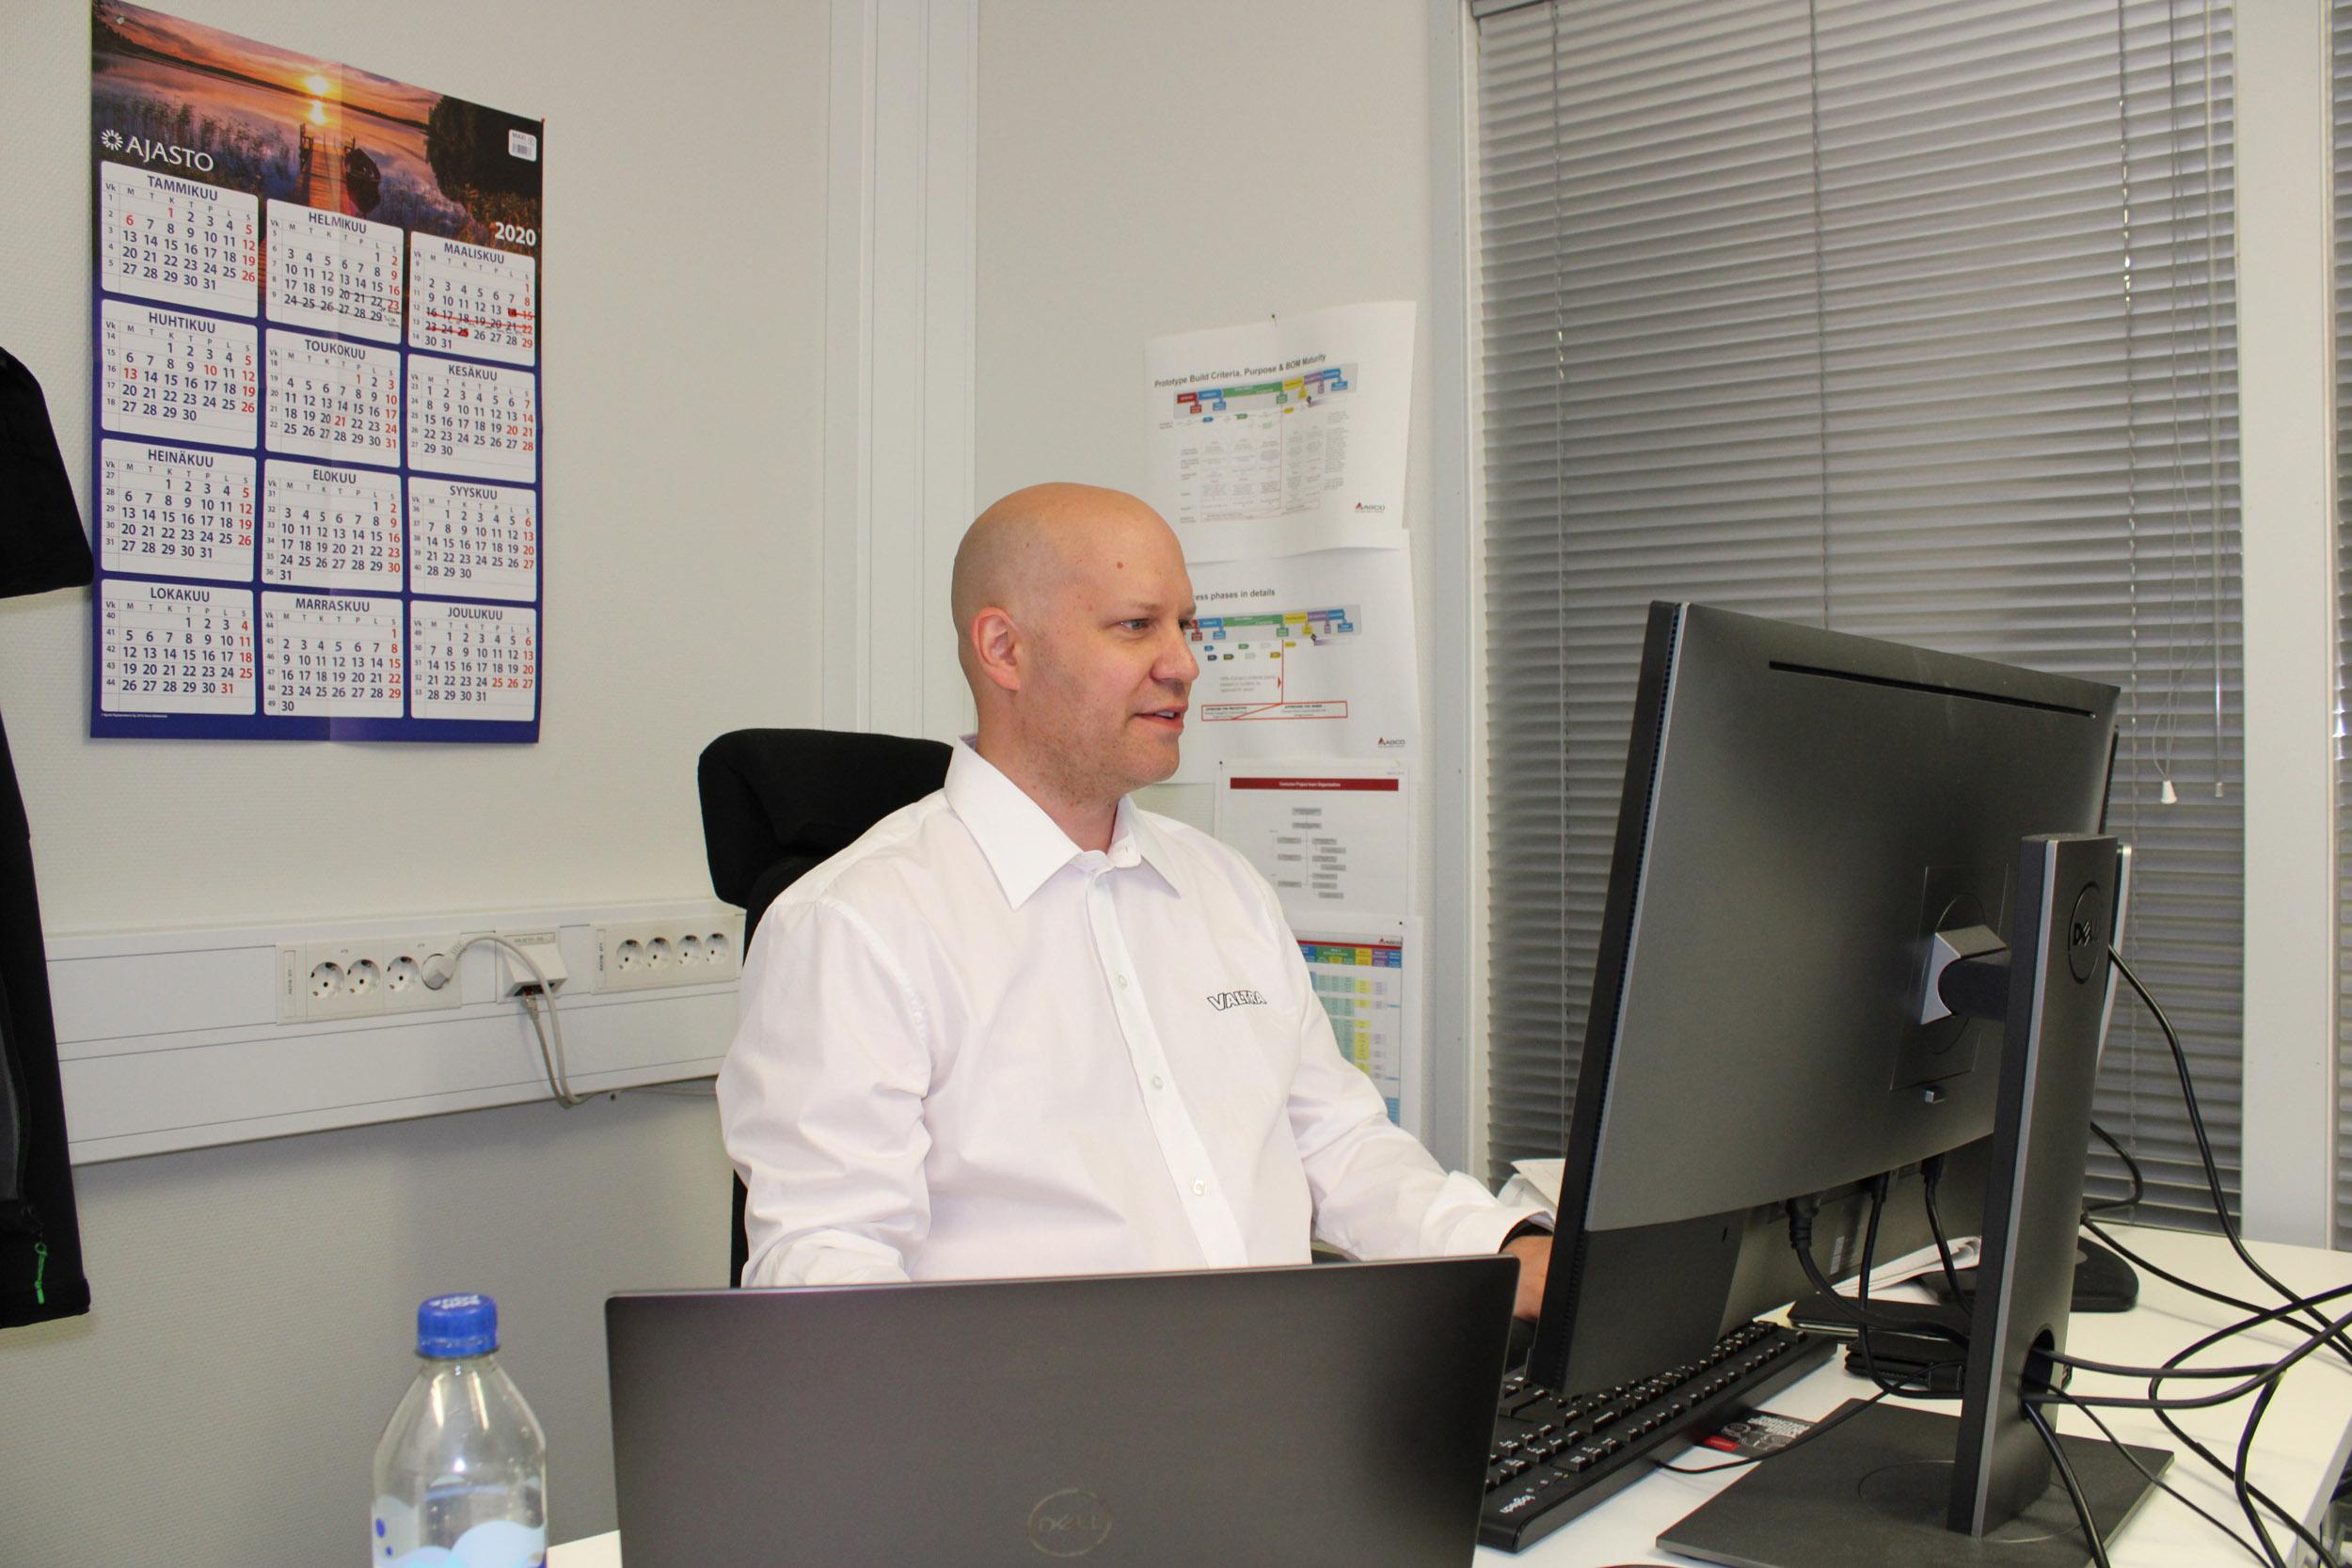 A large part of Platform Lead Engineer Jussi Lappi’s workday is spent in the office and attending meetings.